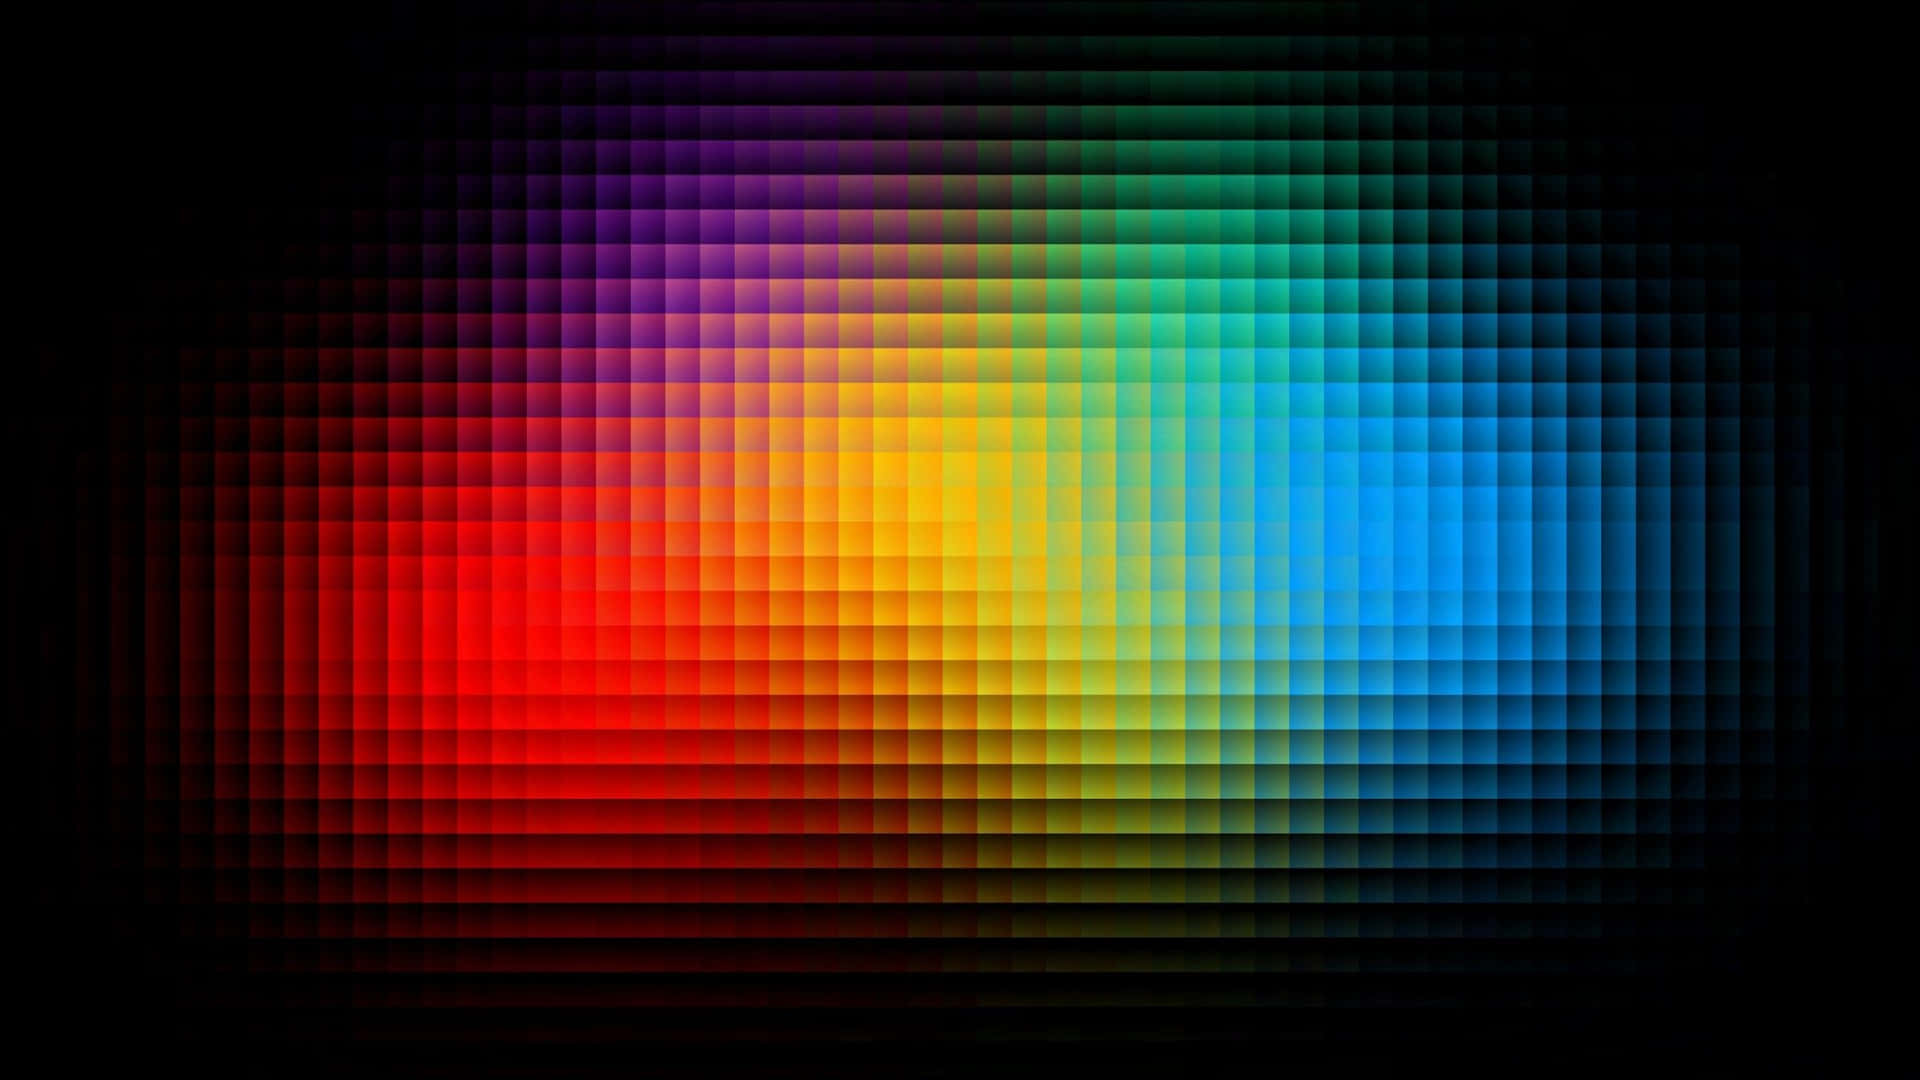 A Colorful Background With Squares Of Different Colors